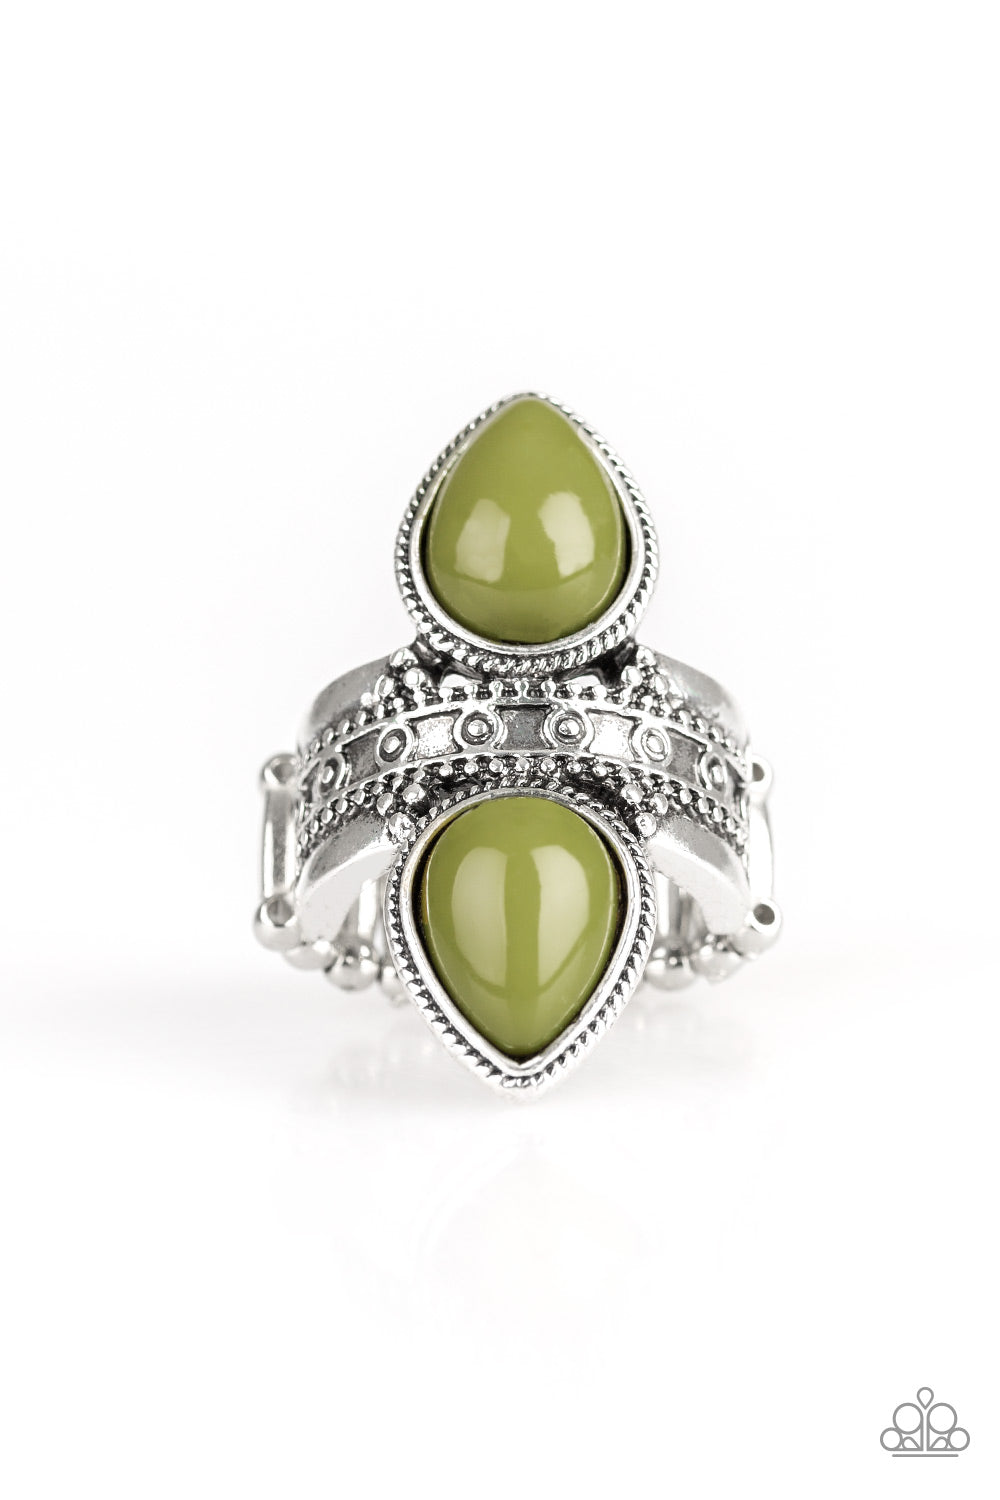 Paparazzi Ring - New Age Leader - Green